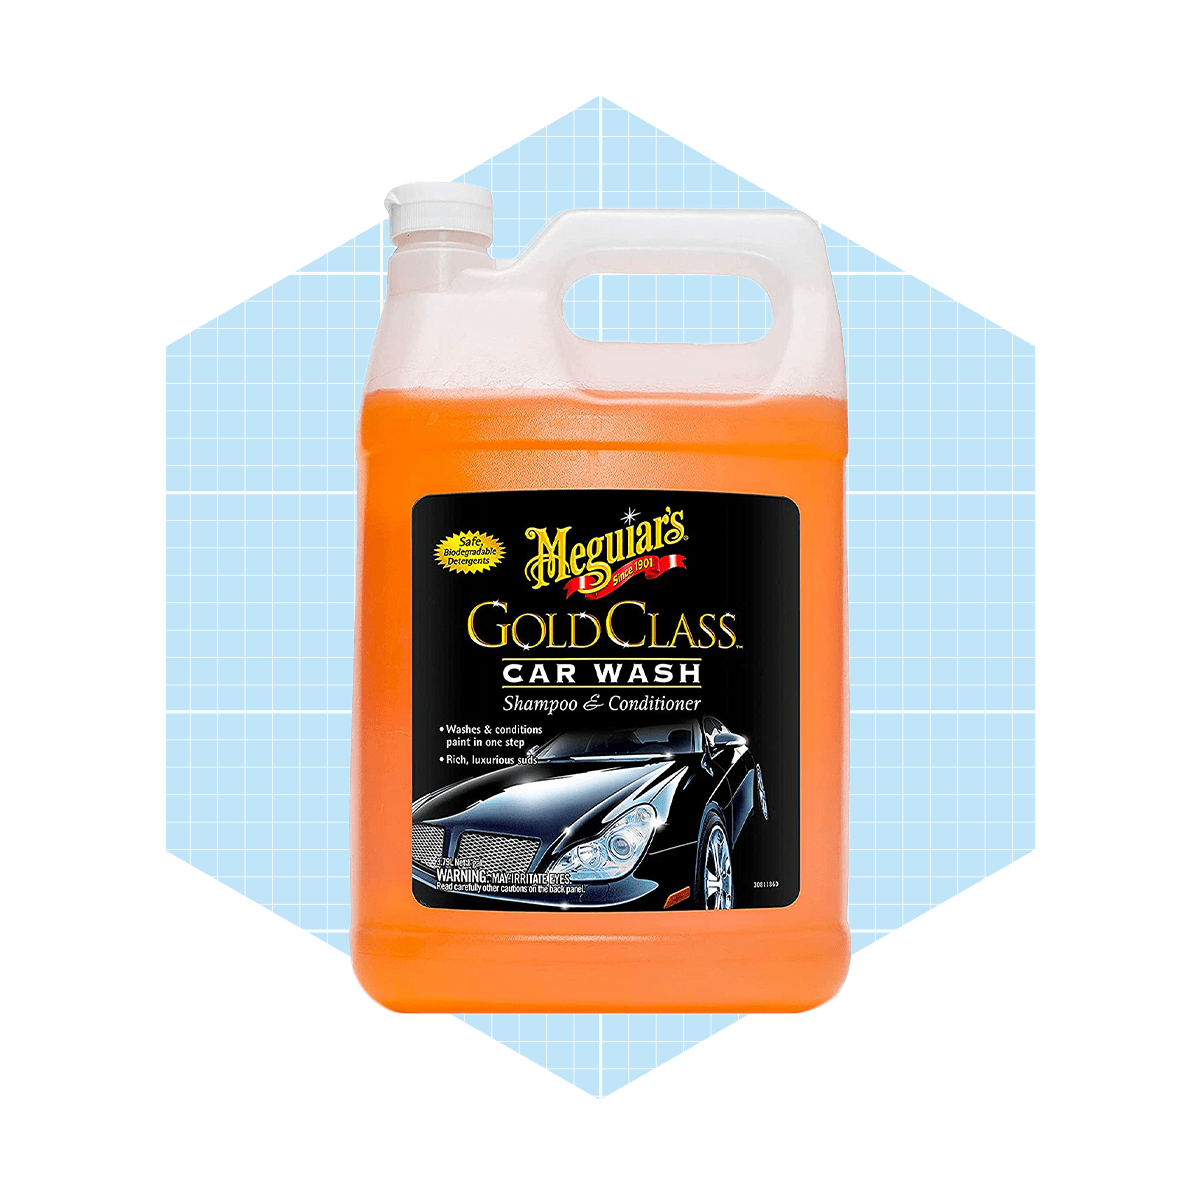 Meguiars Gold Class Car Wash Review: Does It Actually Work? [2023] 